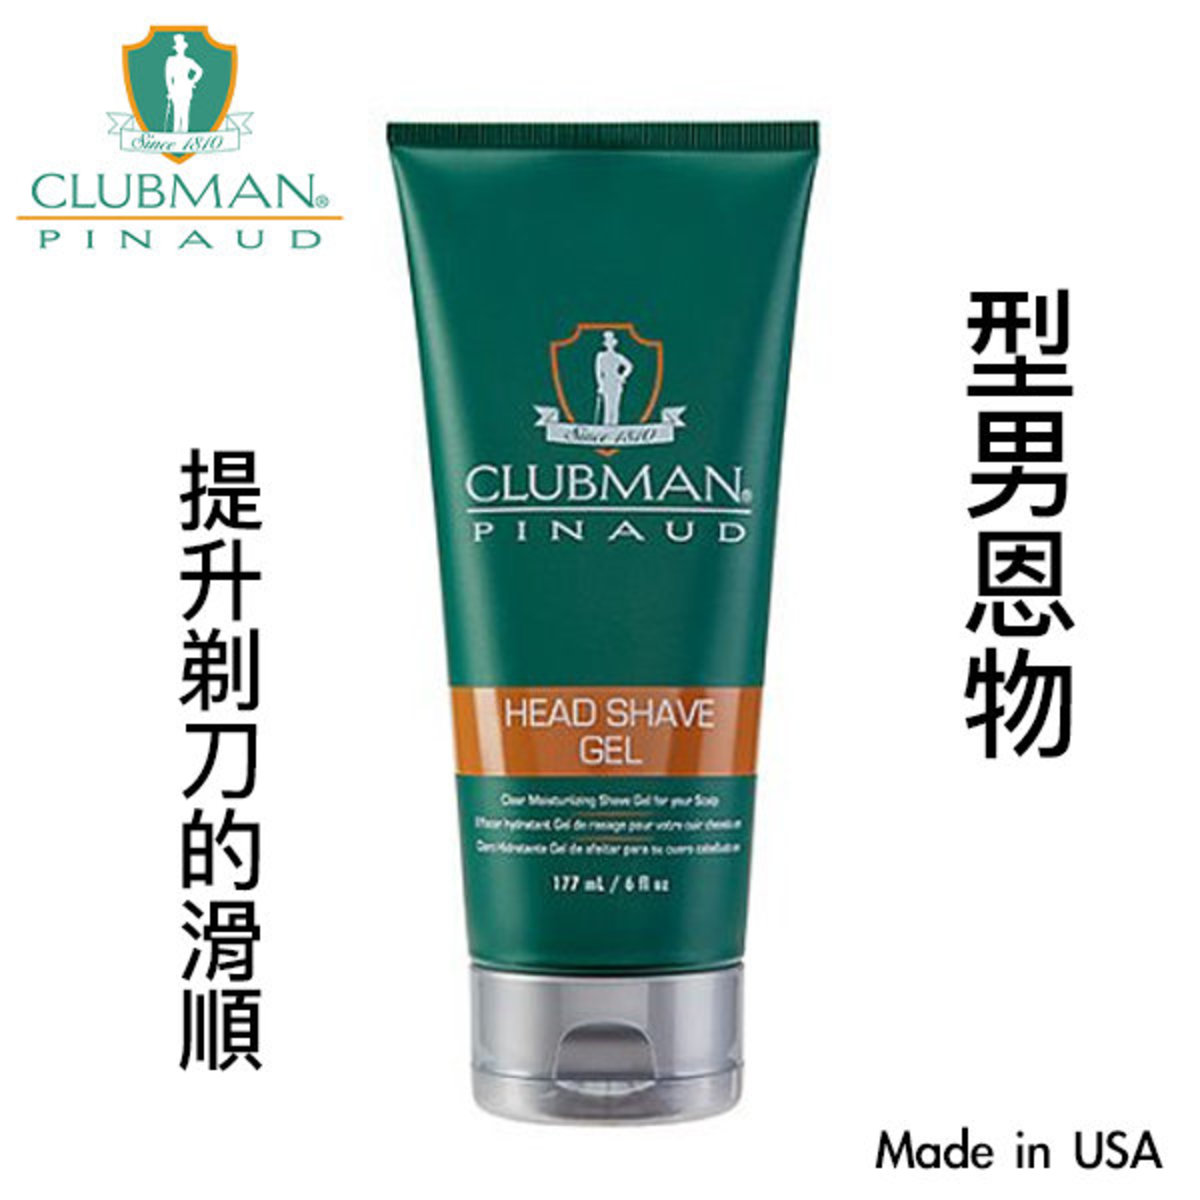 clubman styling gel by ed pinaud for men